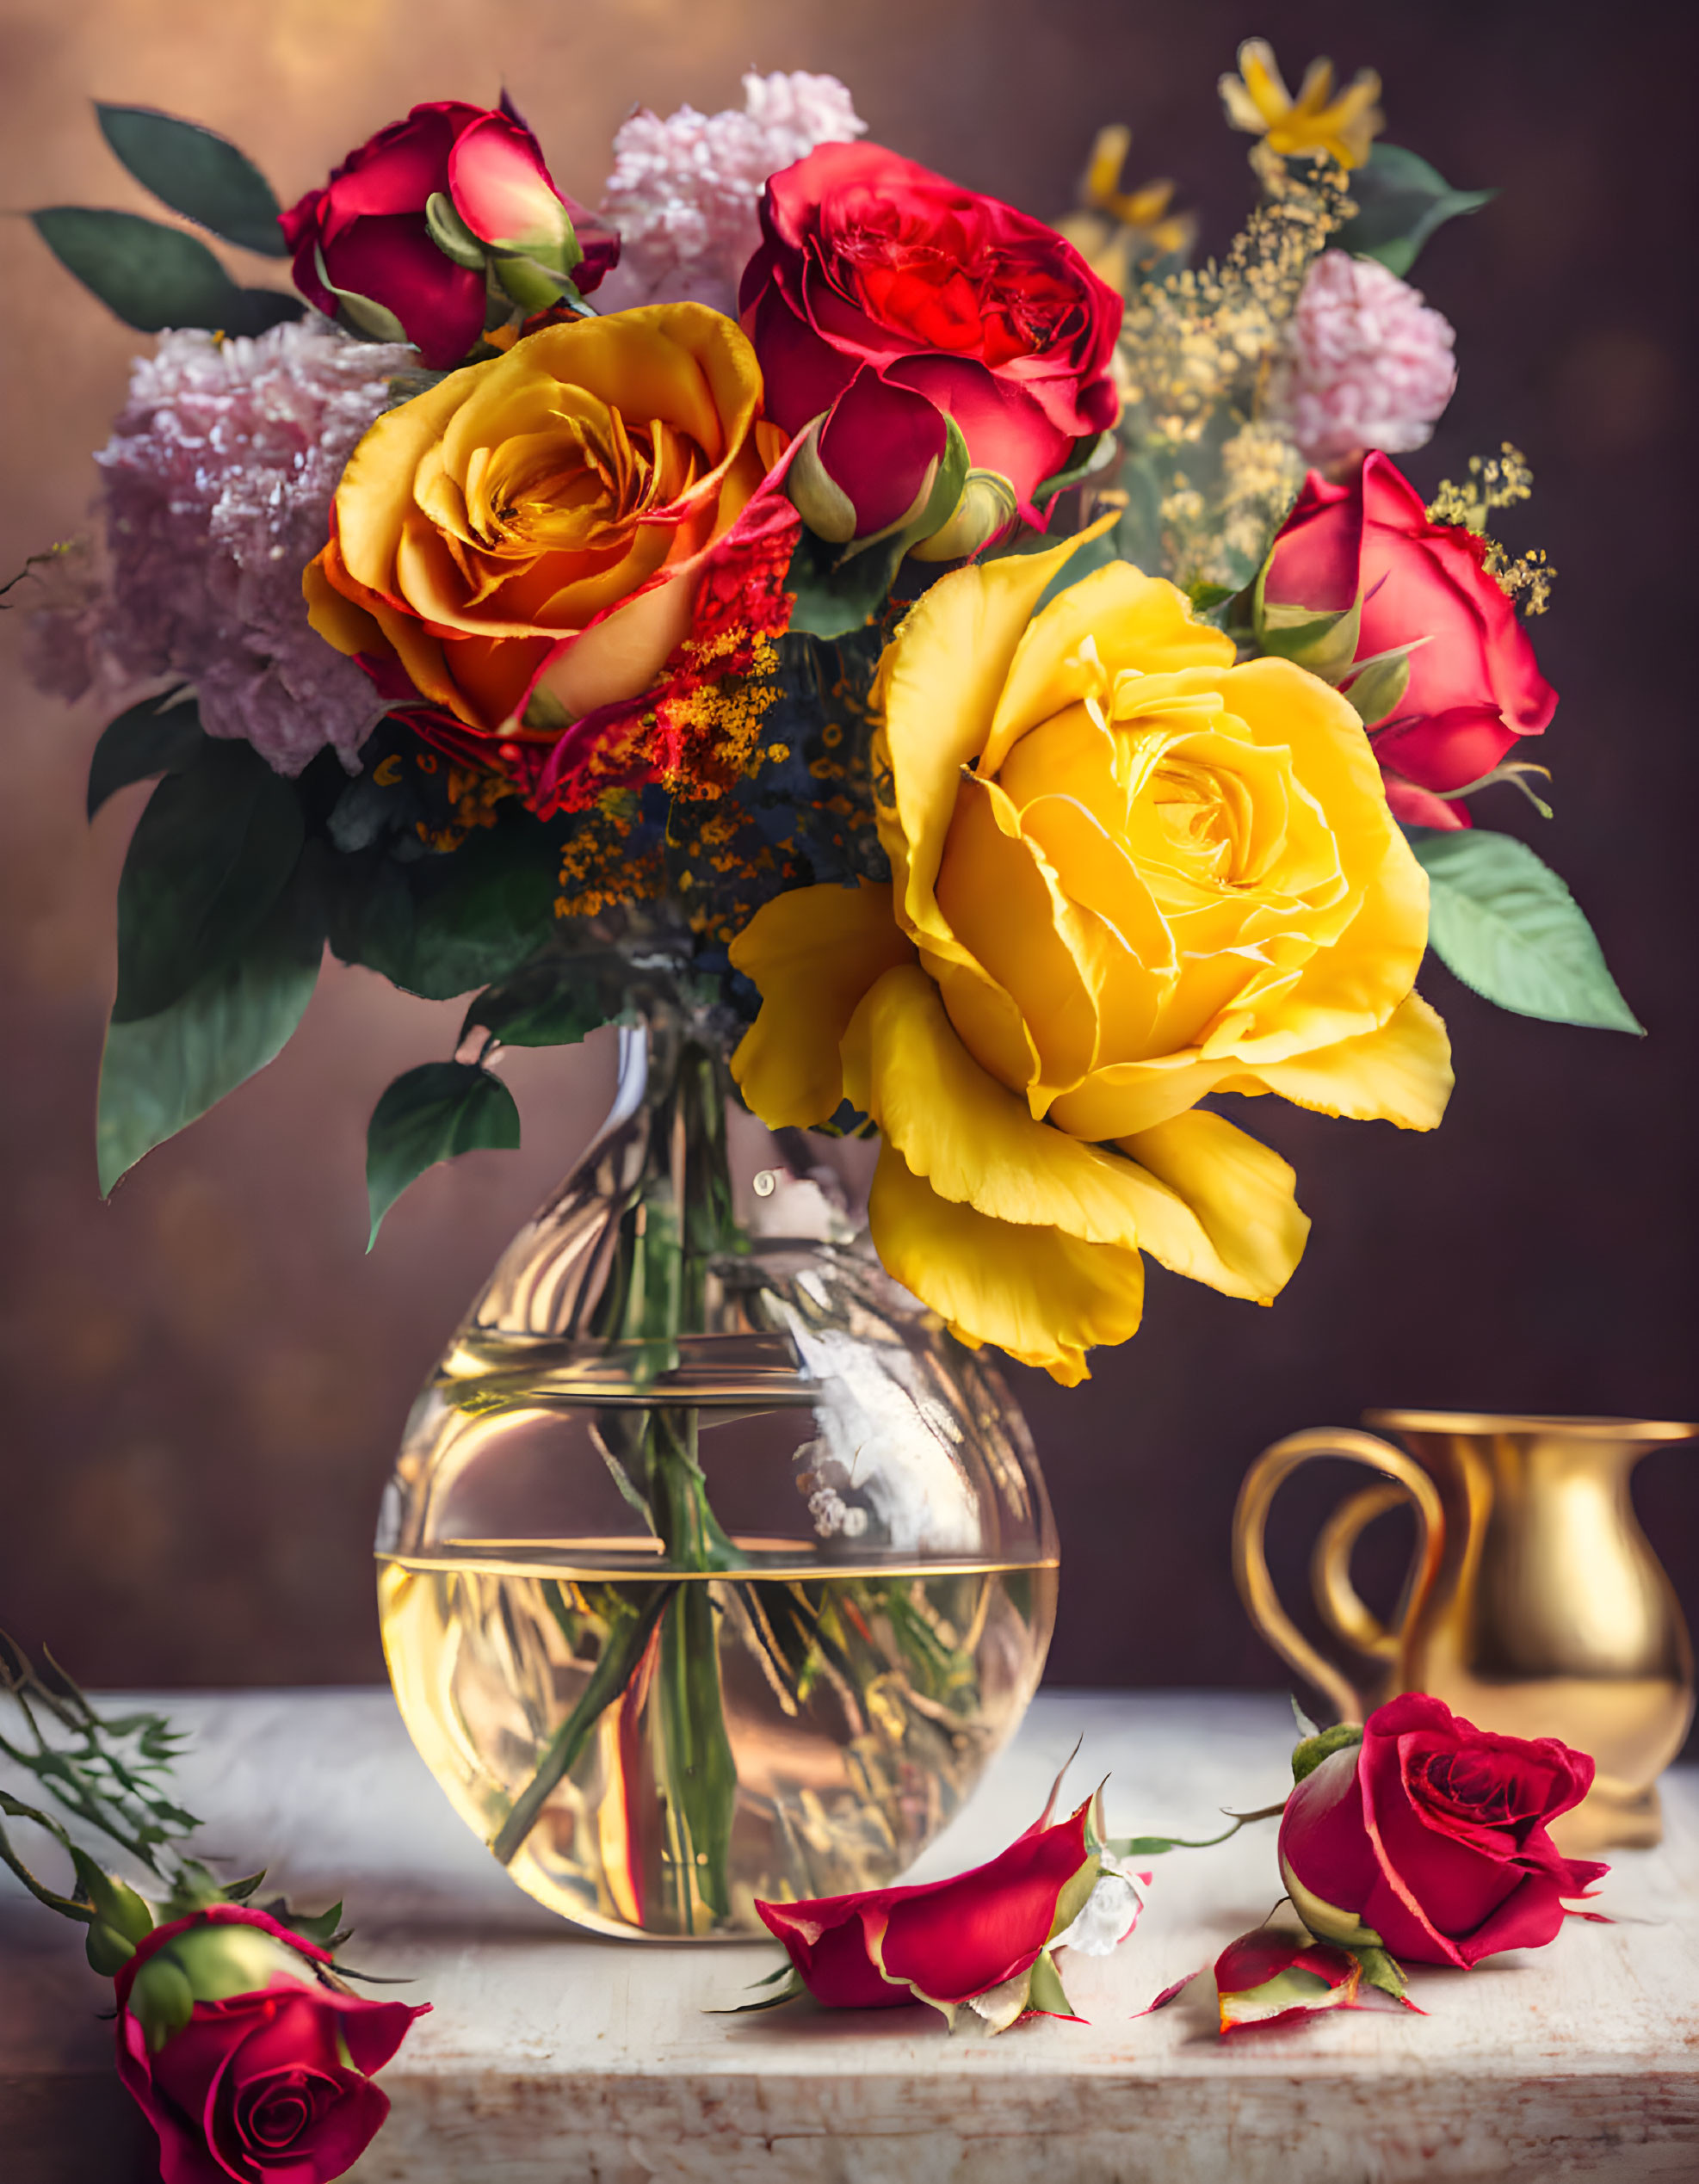 A vase with yellow and red roses